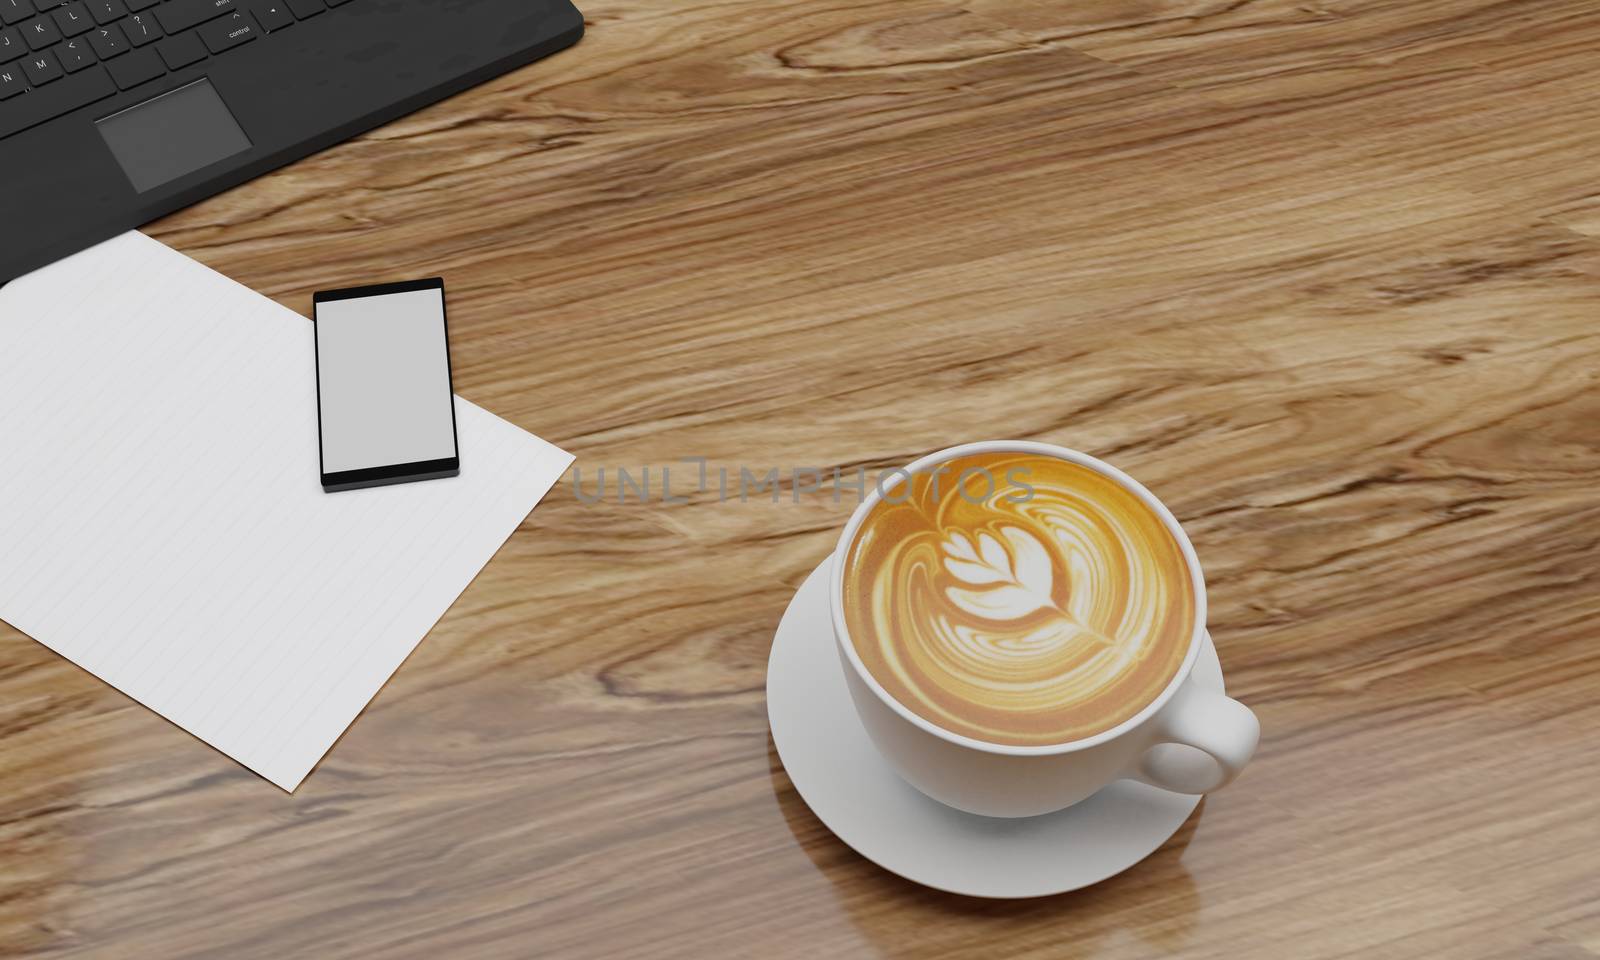 Latte Art coffee in white cup on wooden surface table. Black smartphone blank screen and white sheet on table. Copy space and work desk concept. 3D Rendering.